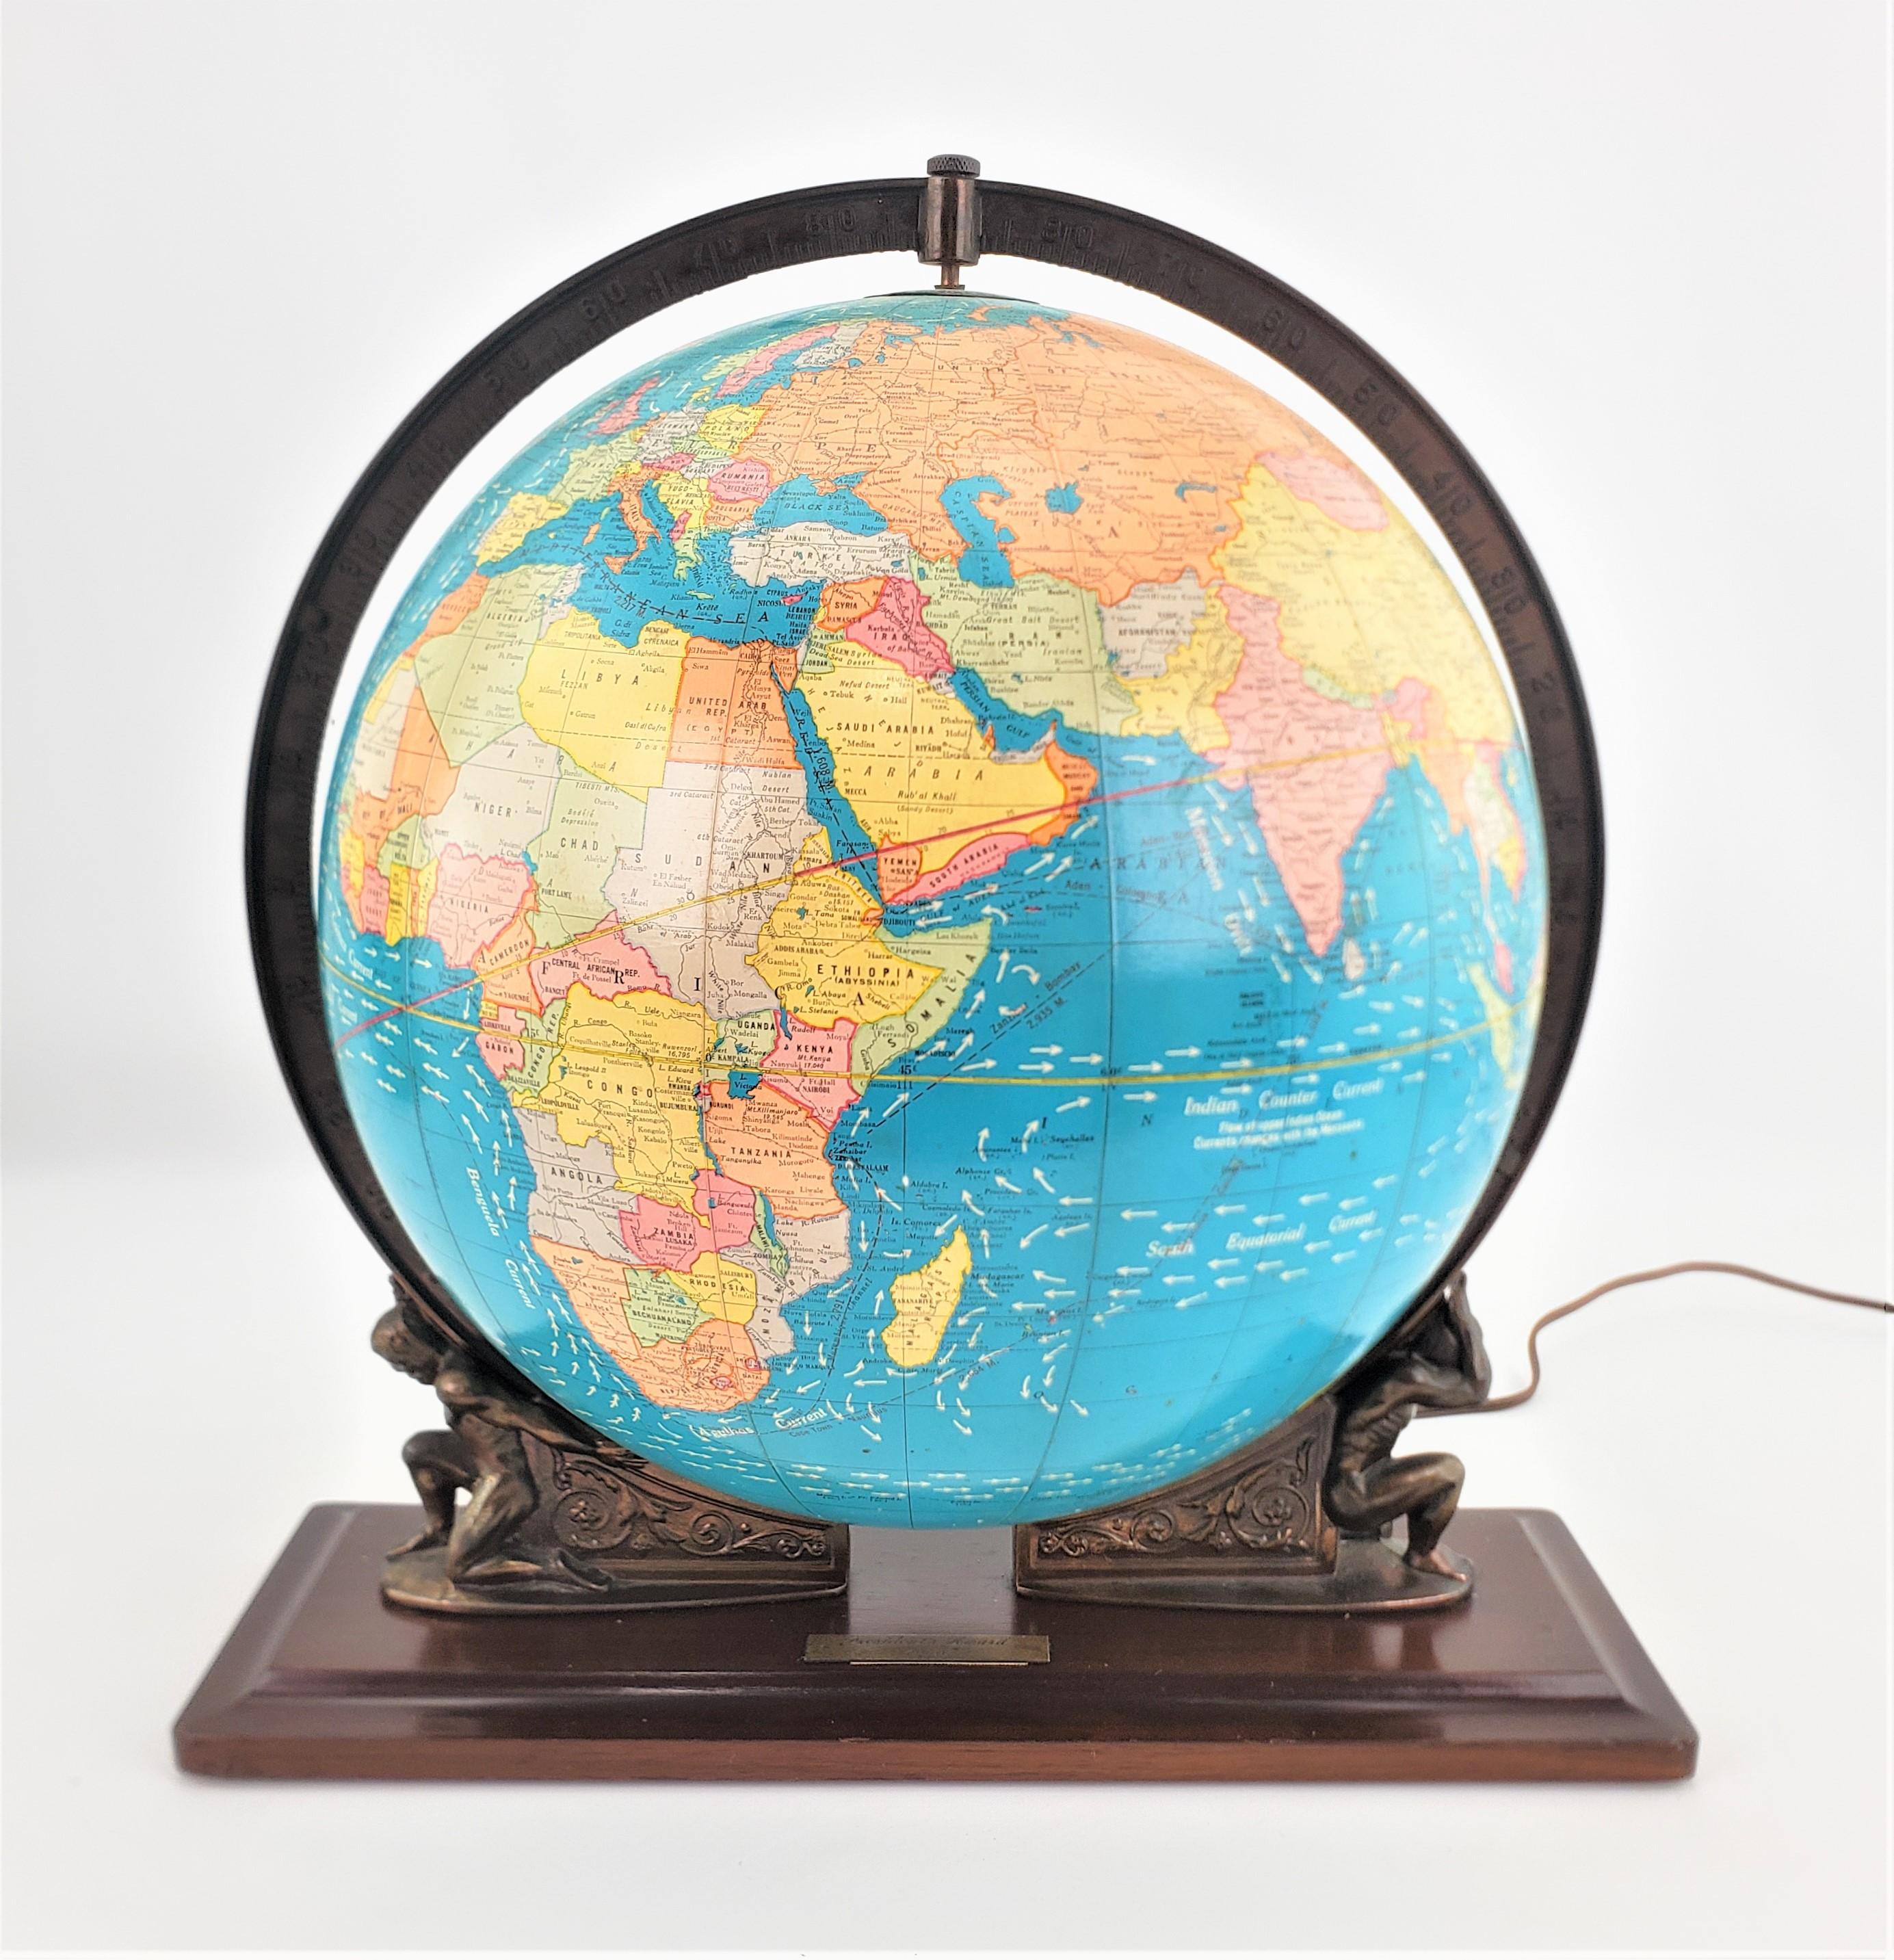 This illuminated terrestrial globe was made by the George F. Cram Company of the United States who is well known for the production of initially maps and diversified to include globes since 1928. This globe was produced in 1966 in the style of the